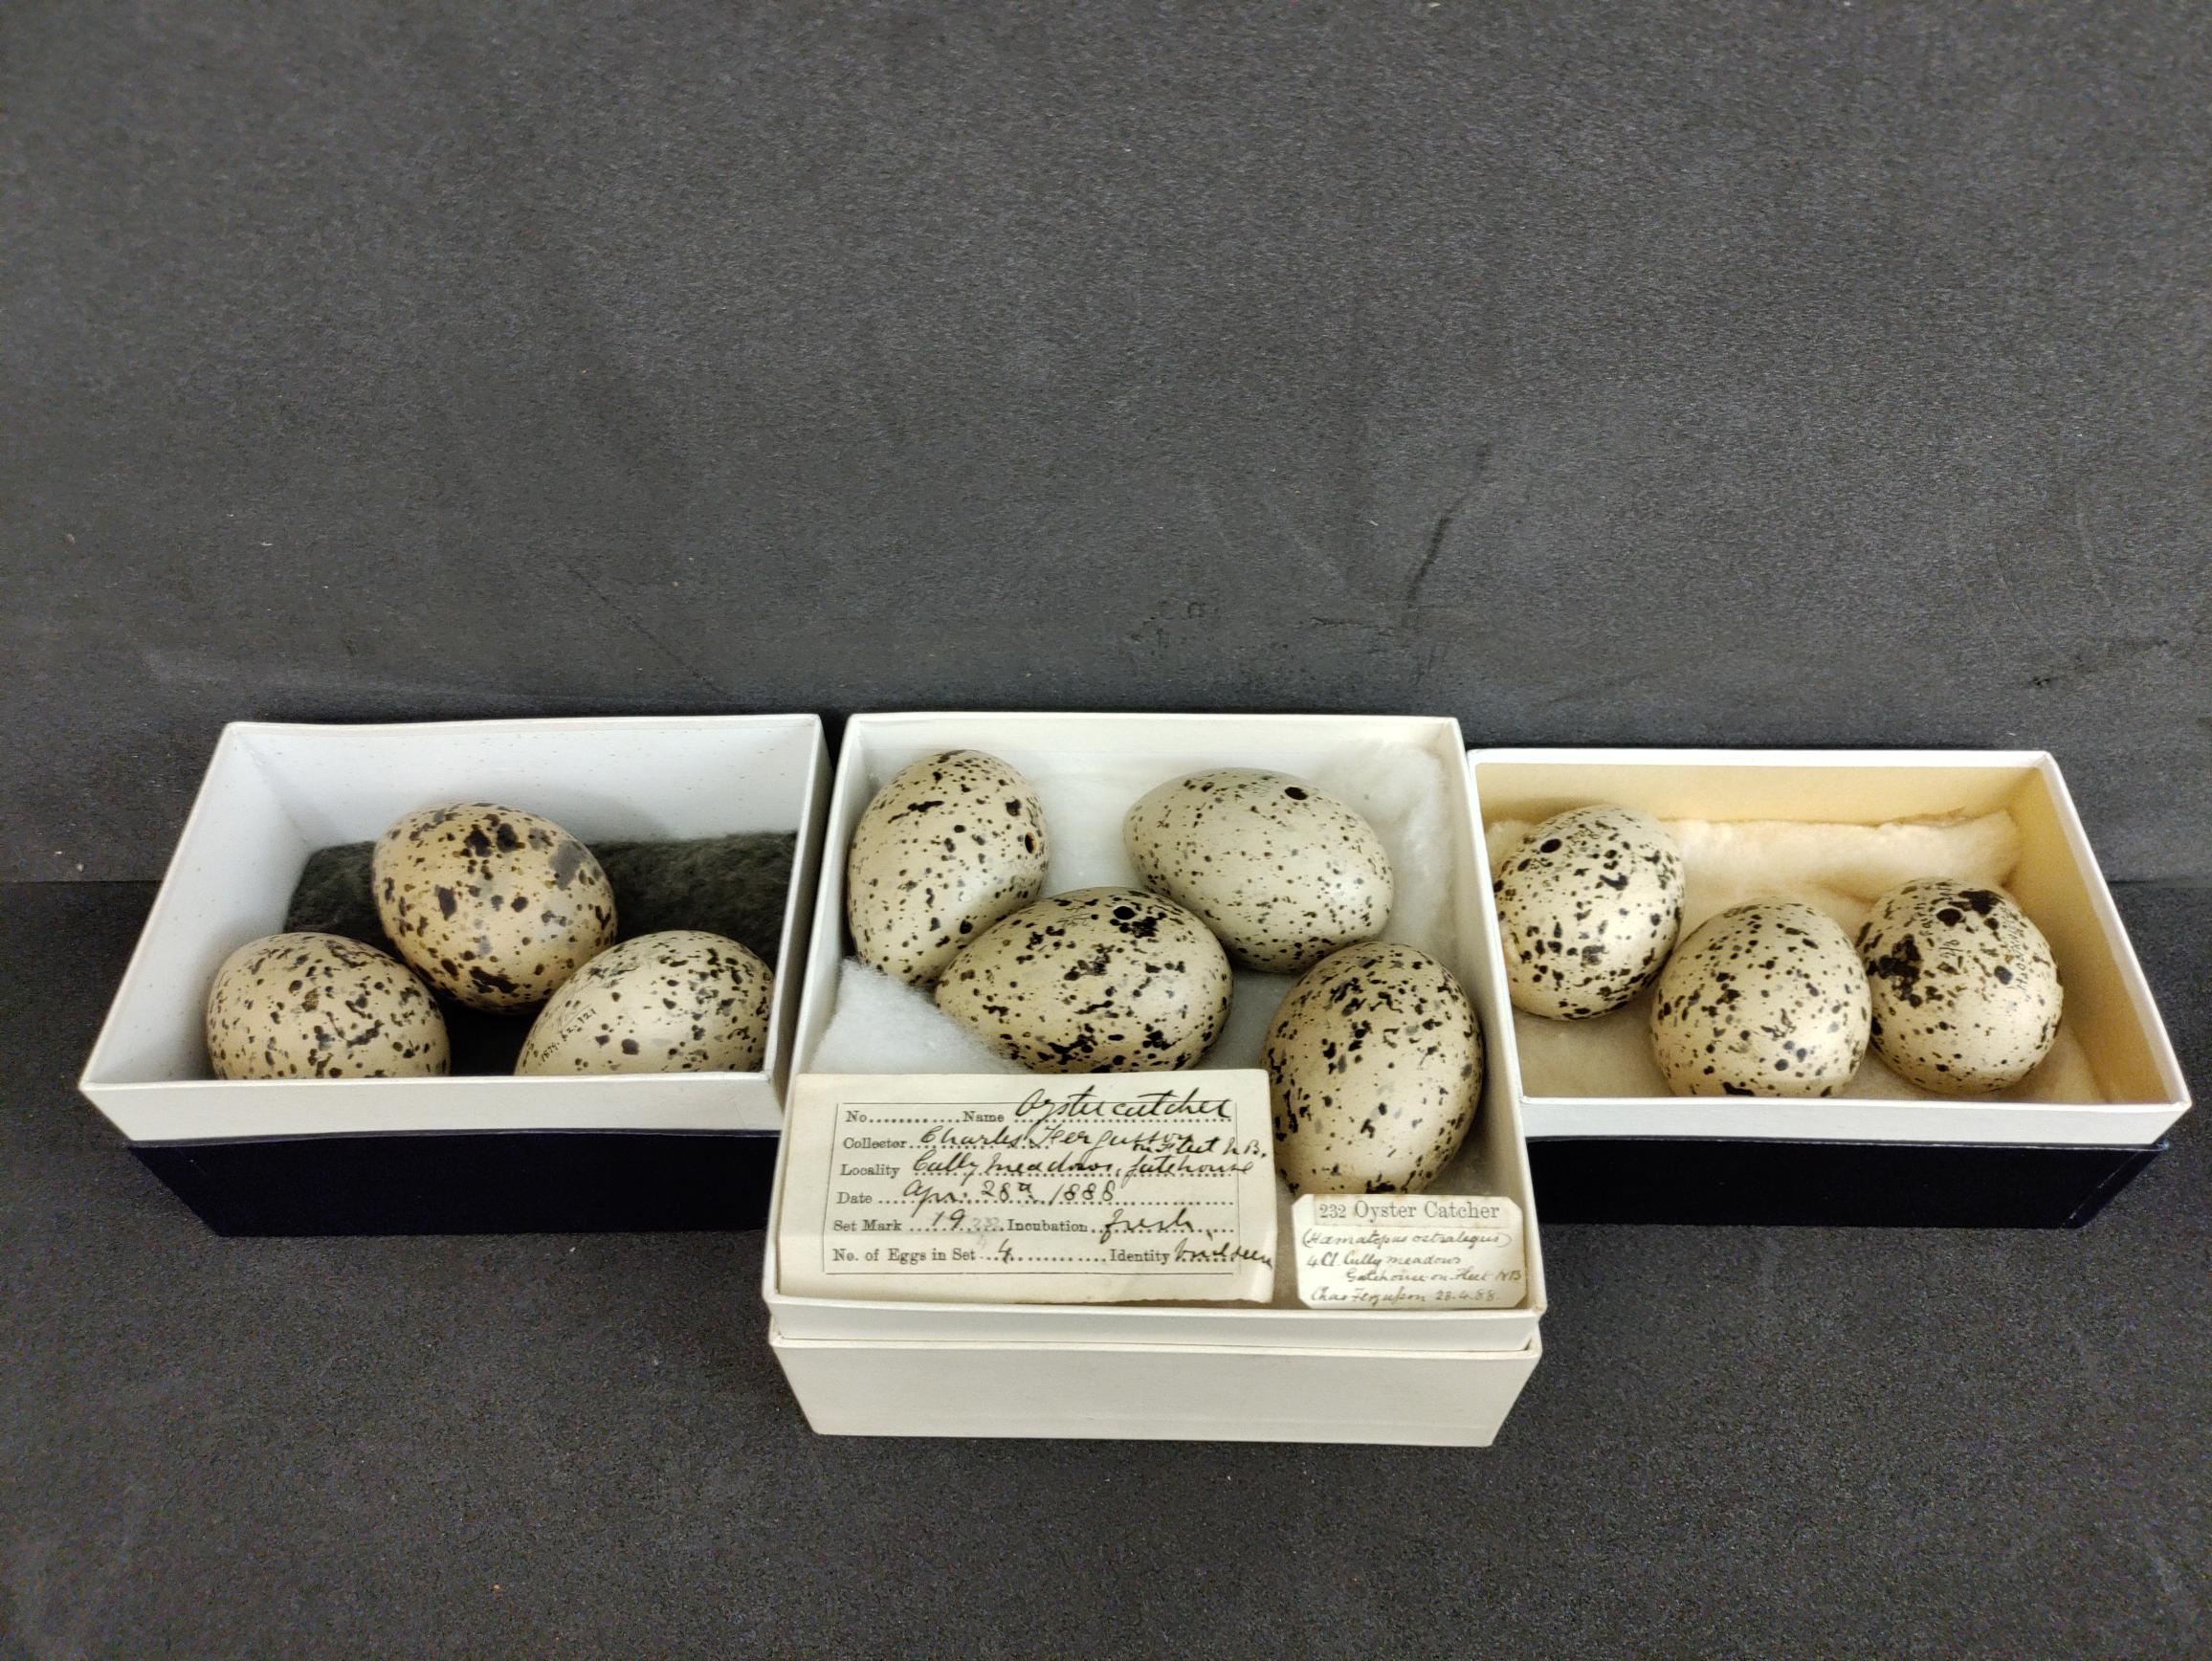 Ten speckled eggs in three boxes.